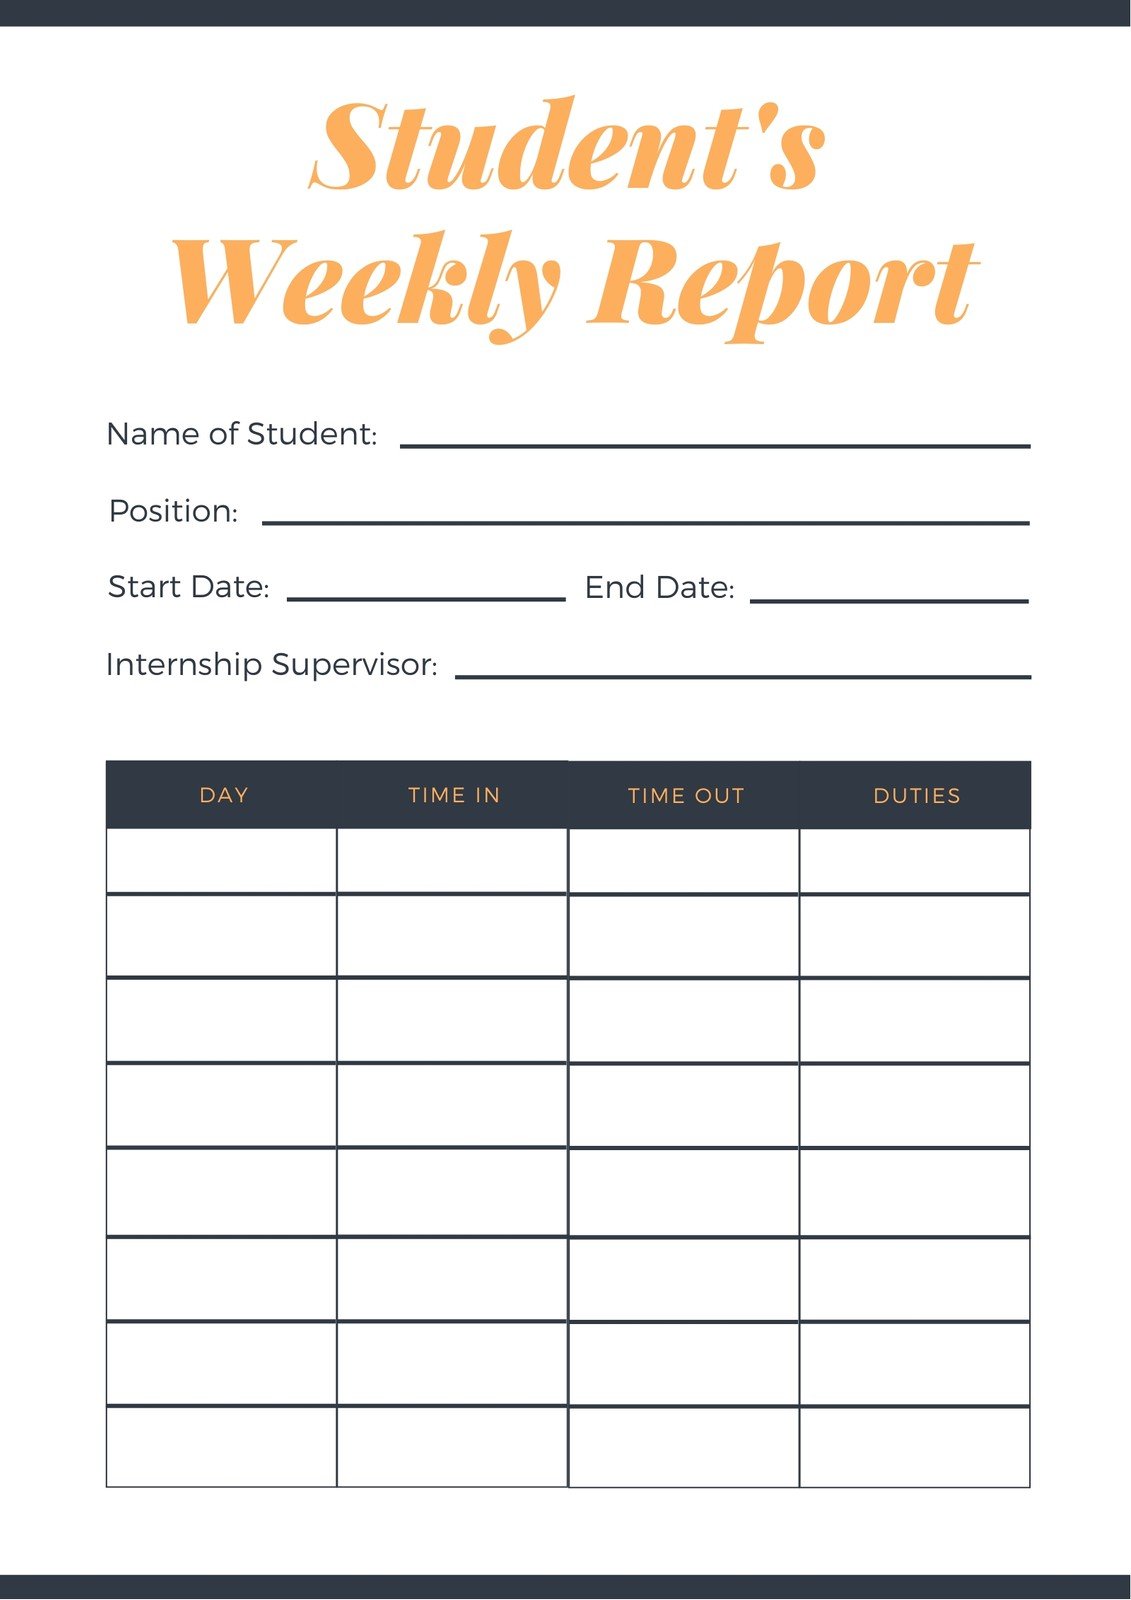 Customize 22+ Weekly Reports Templates Online Canva